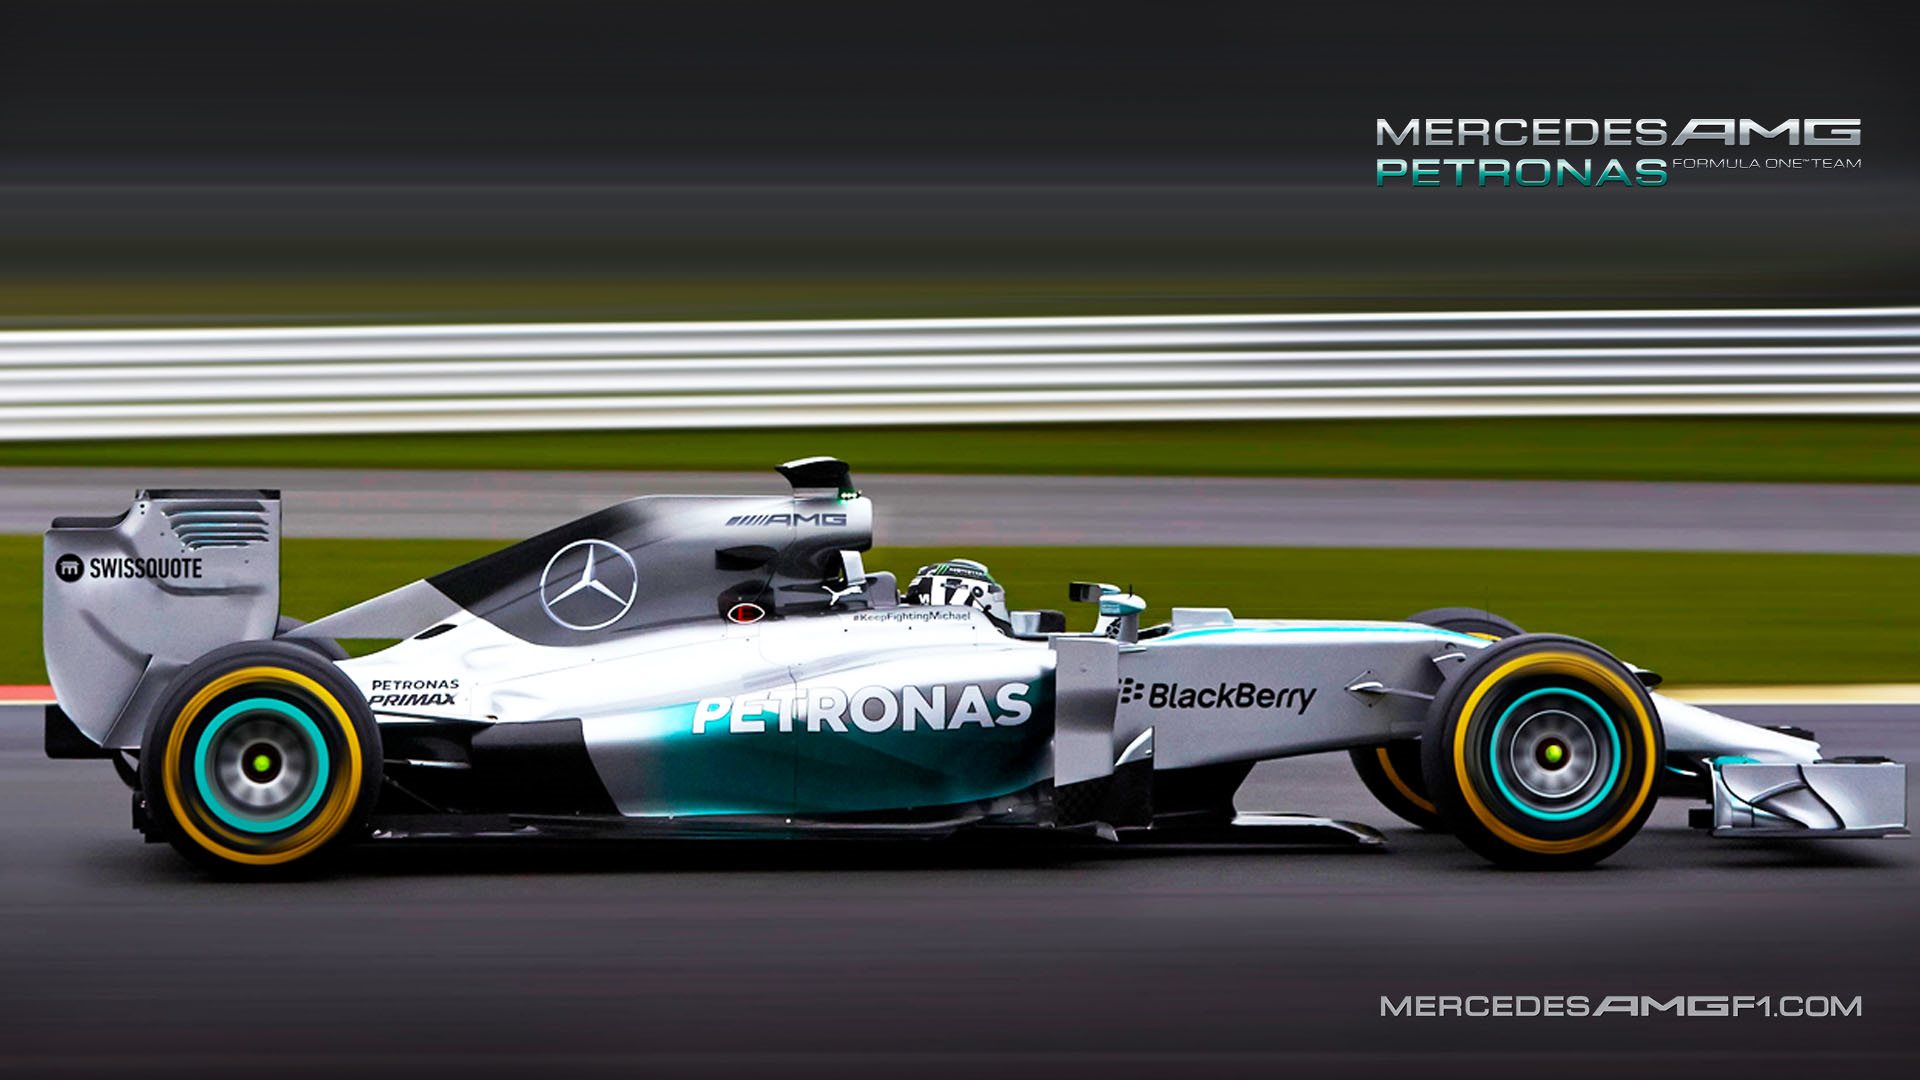 Mercedes AMG Petronas F1 Wallpapers HD Wallpapers 1920x1080